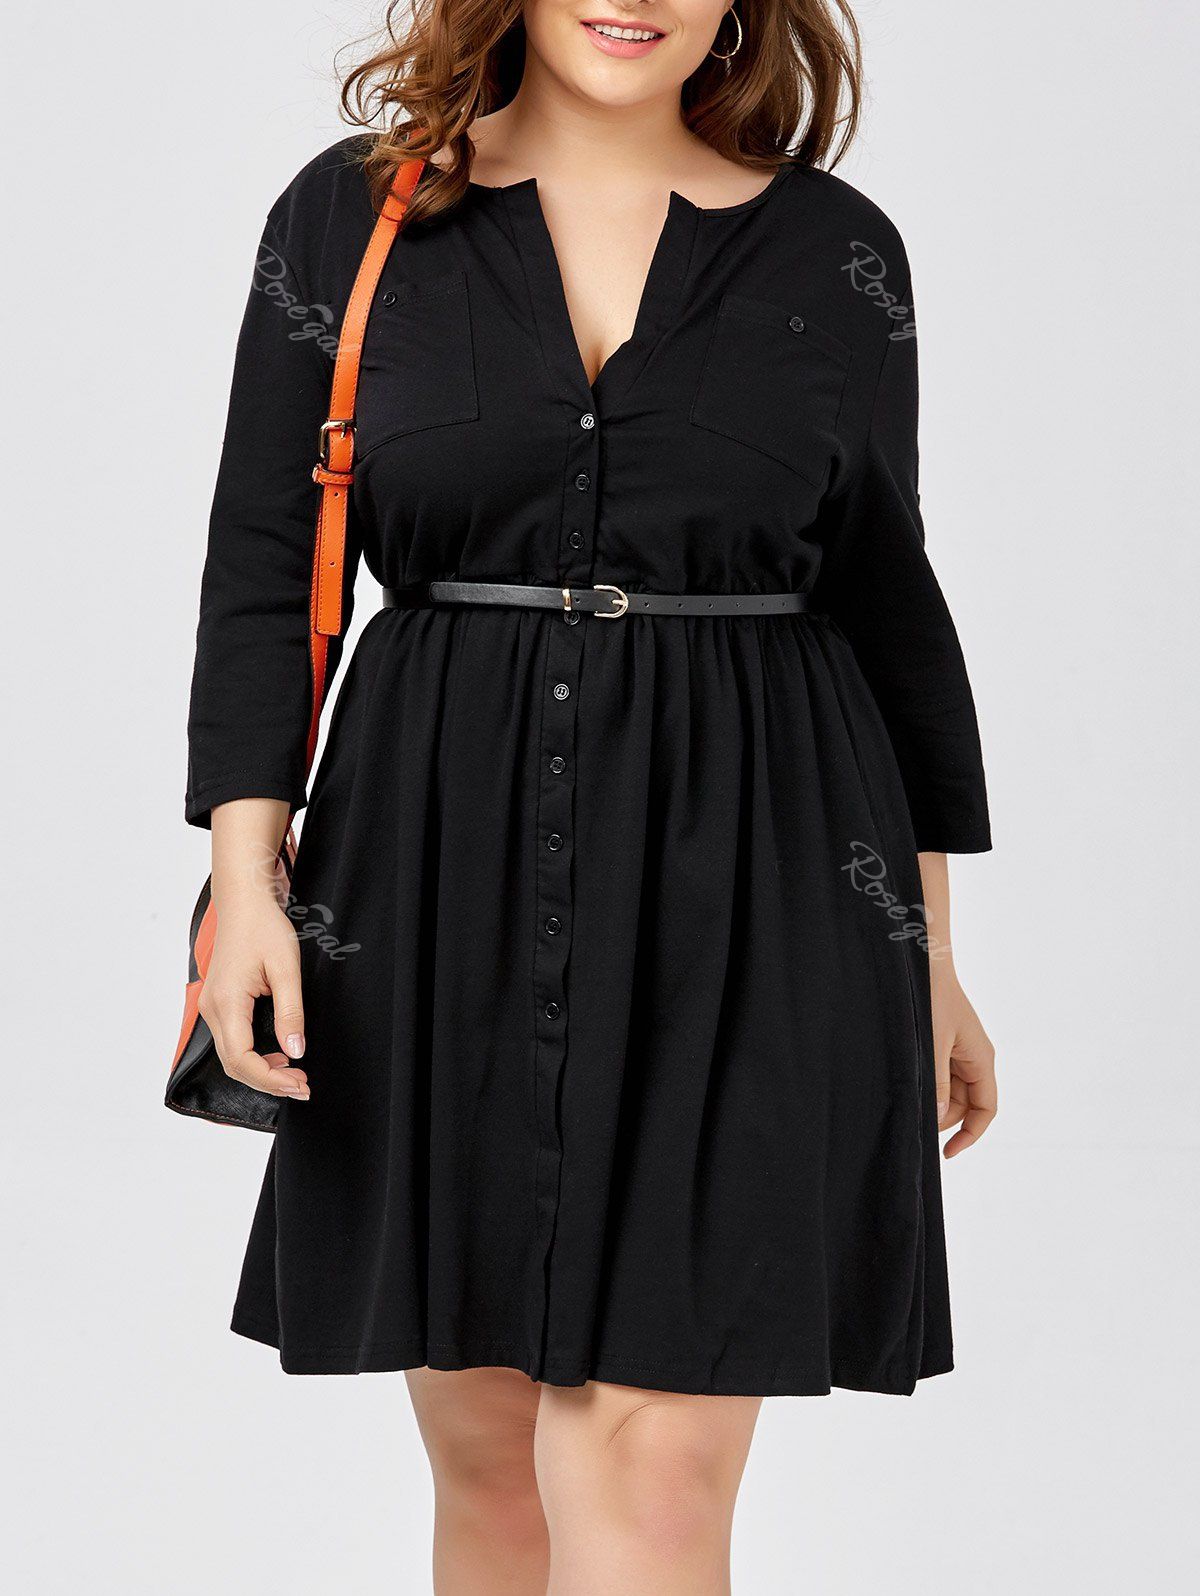 New Plus Size Long Sleeve Button Down Shirt Dress with Belt  